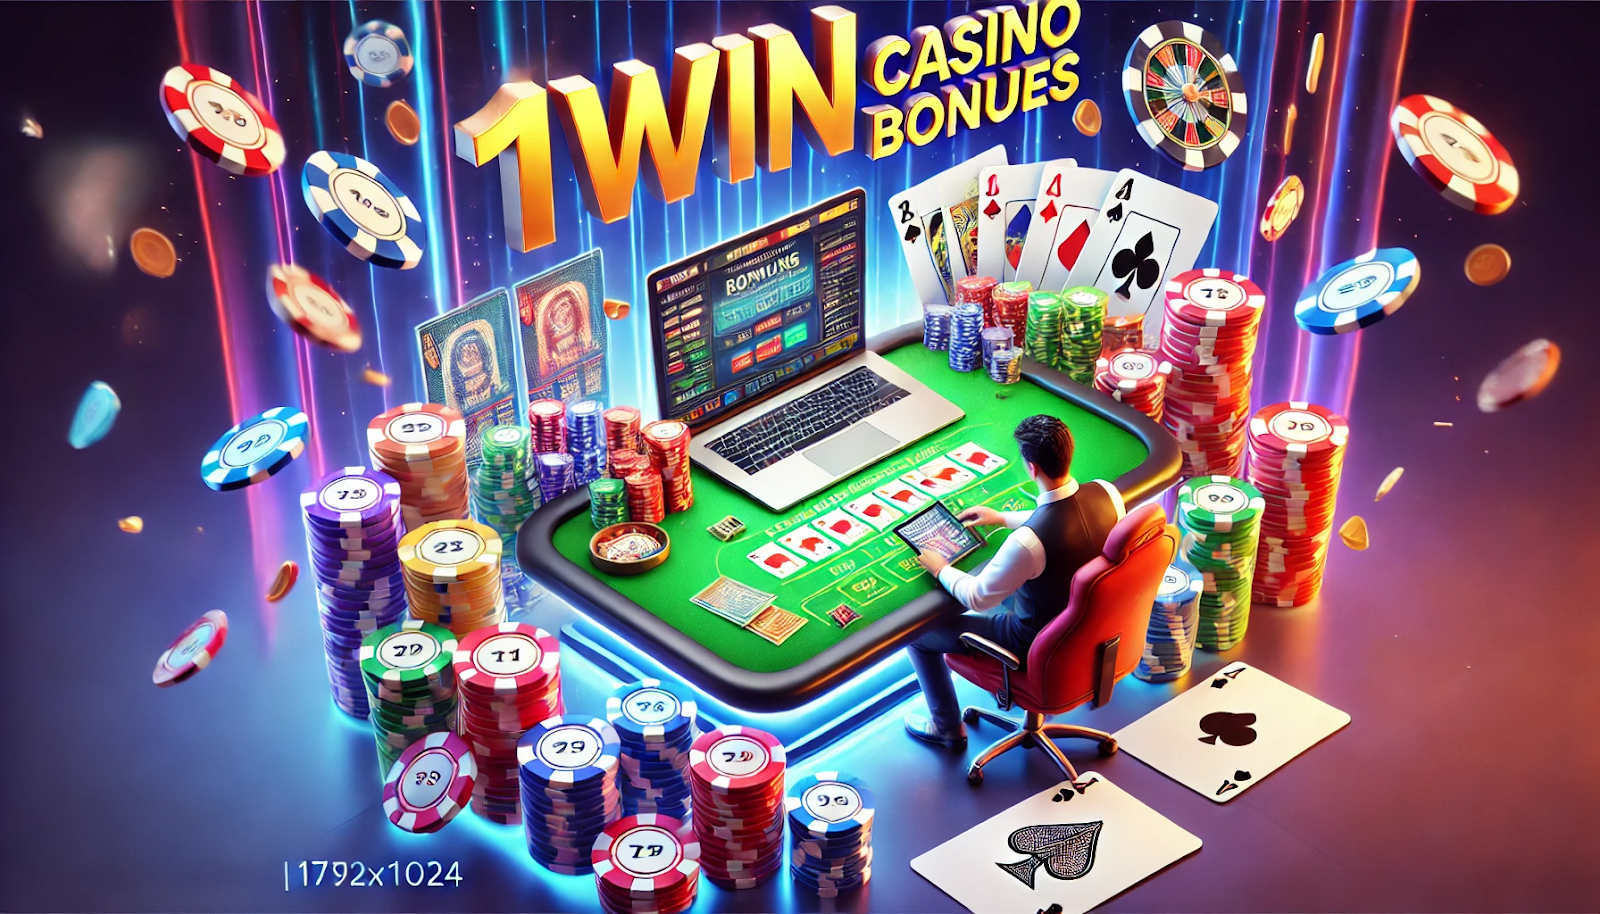 How to Use Casino Free Spins and Bonuses Effectively at 1Win Casino